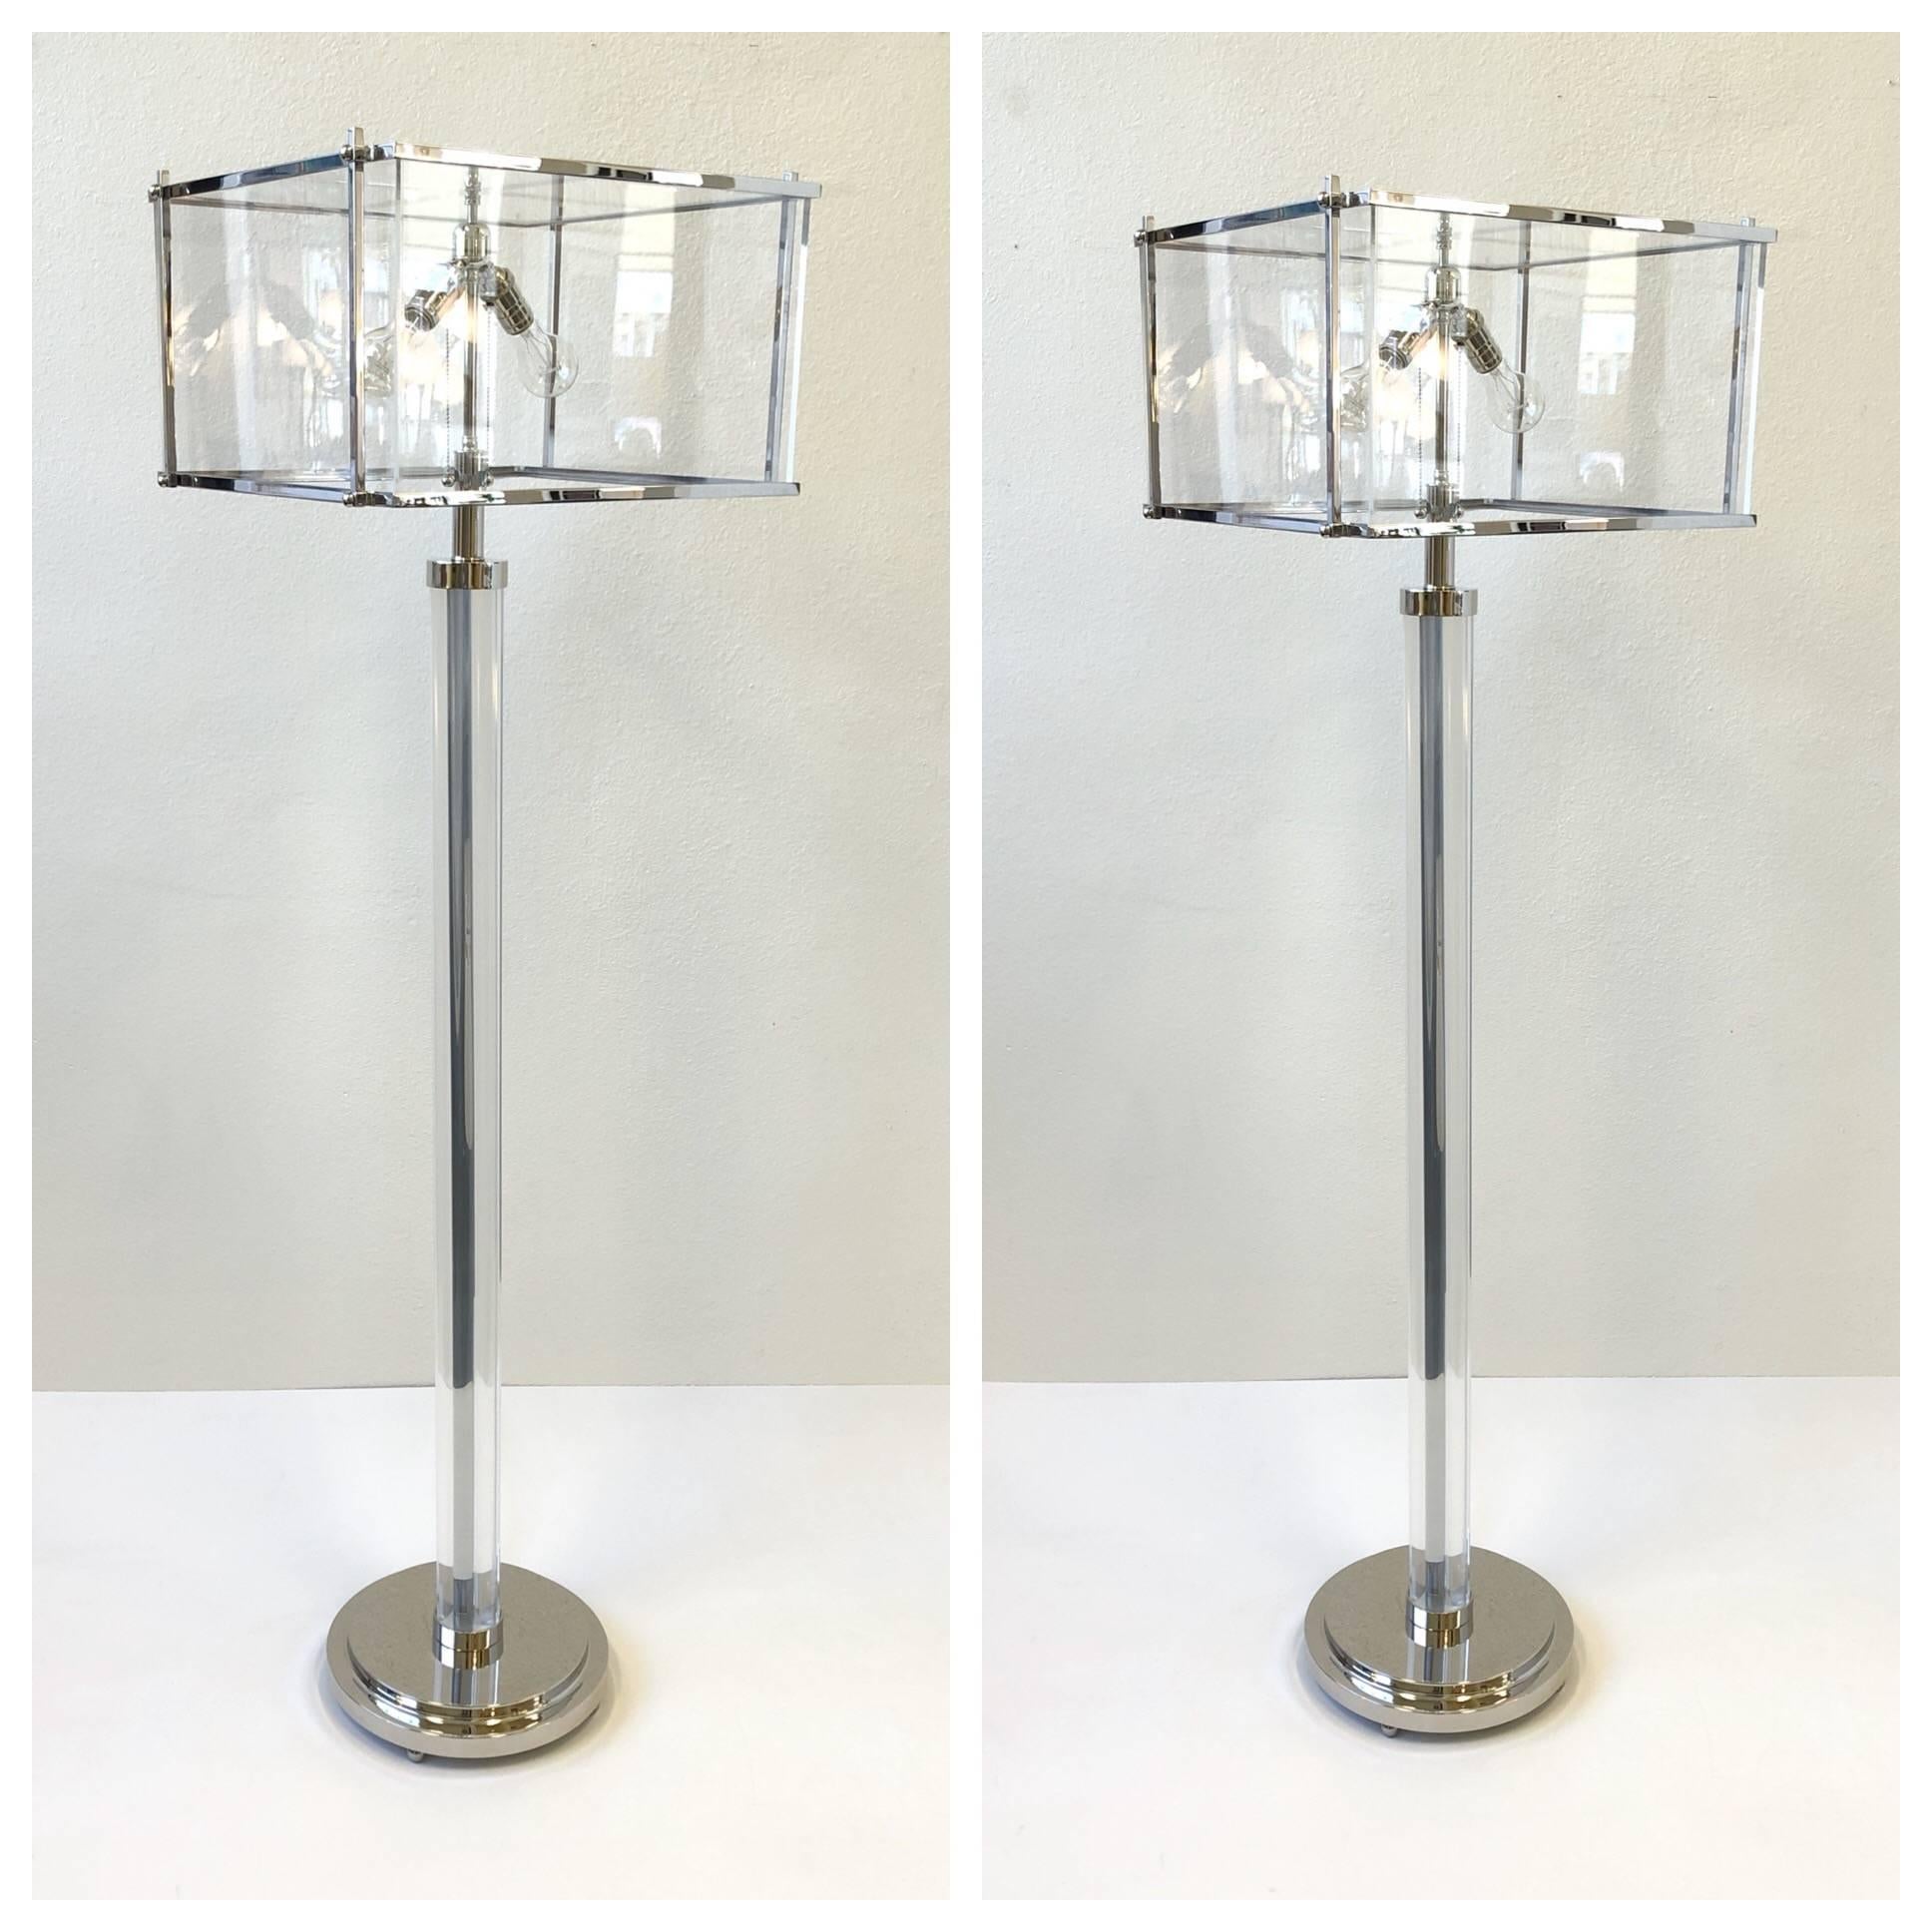 A spectacular pair of clear acrylic and polish nickel floor lamps Design by renowned designer Charles Hollis Jones in the 1970s.
Newly restored.
Dimension: 65” high 19.75” wide and 18” deep.